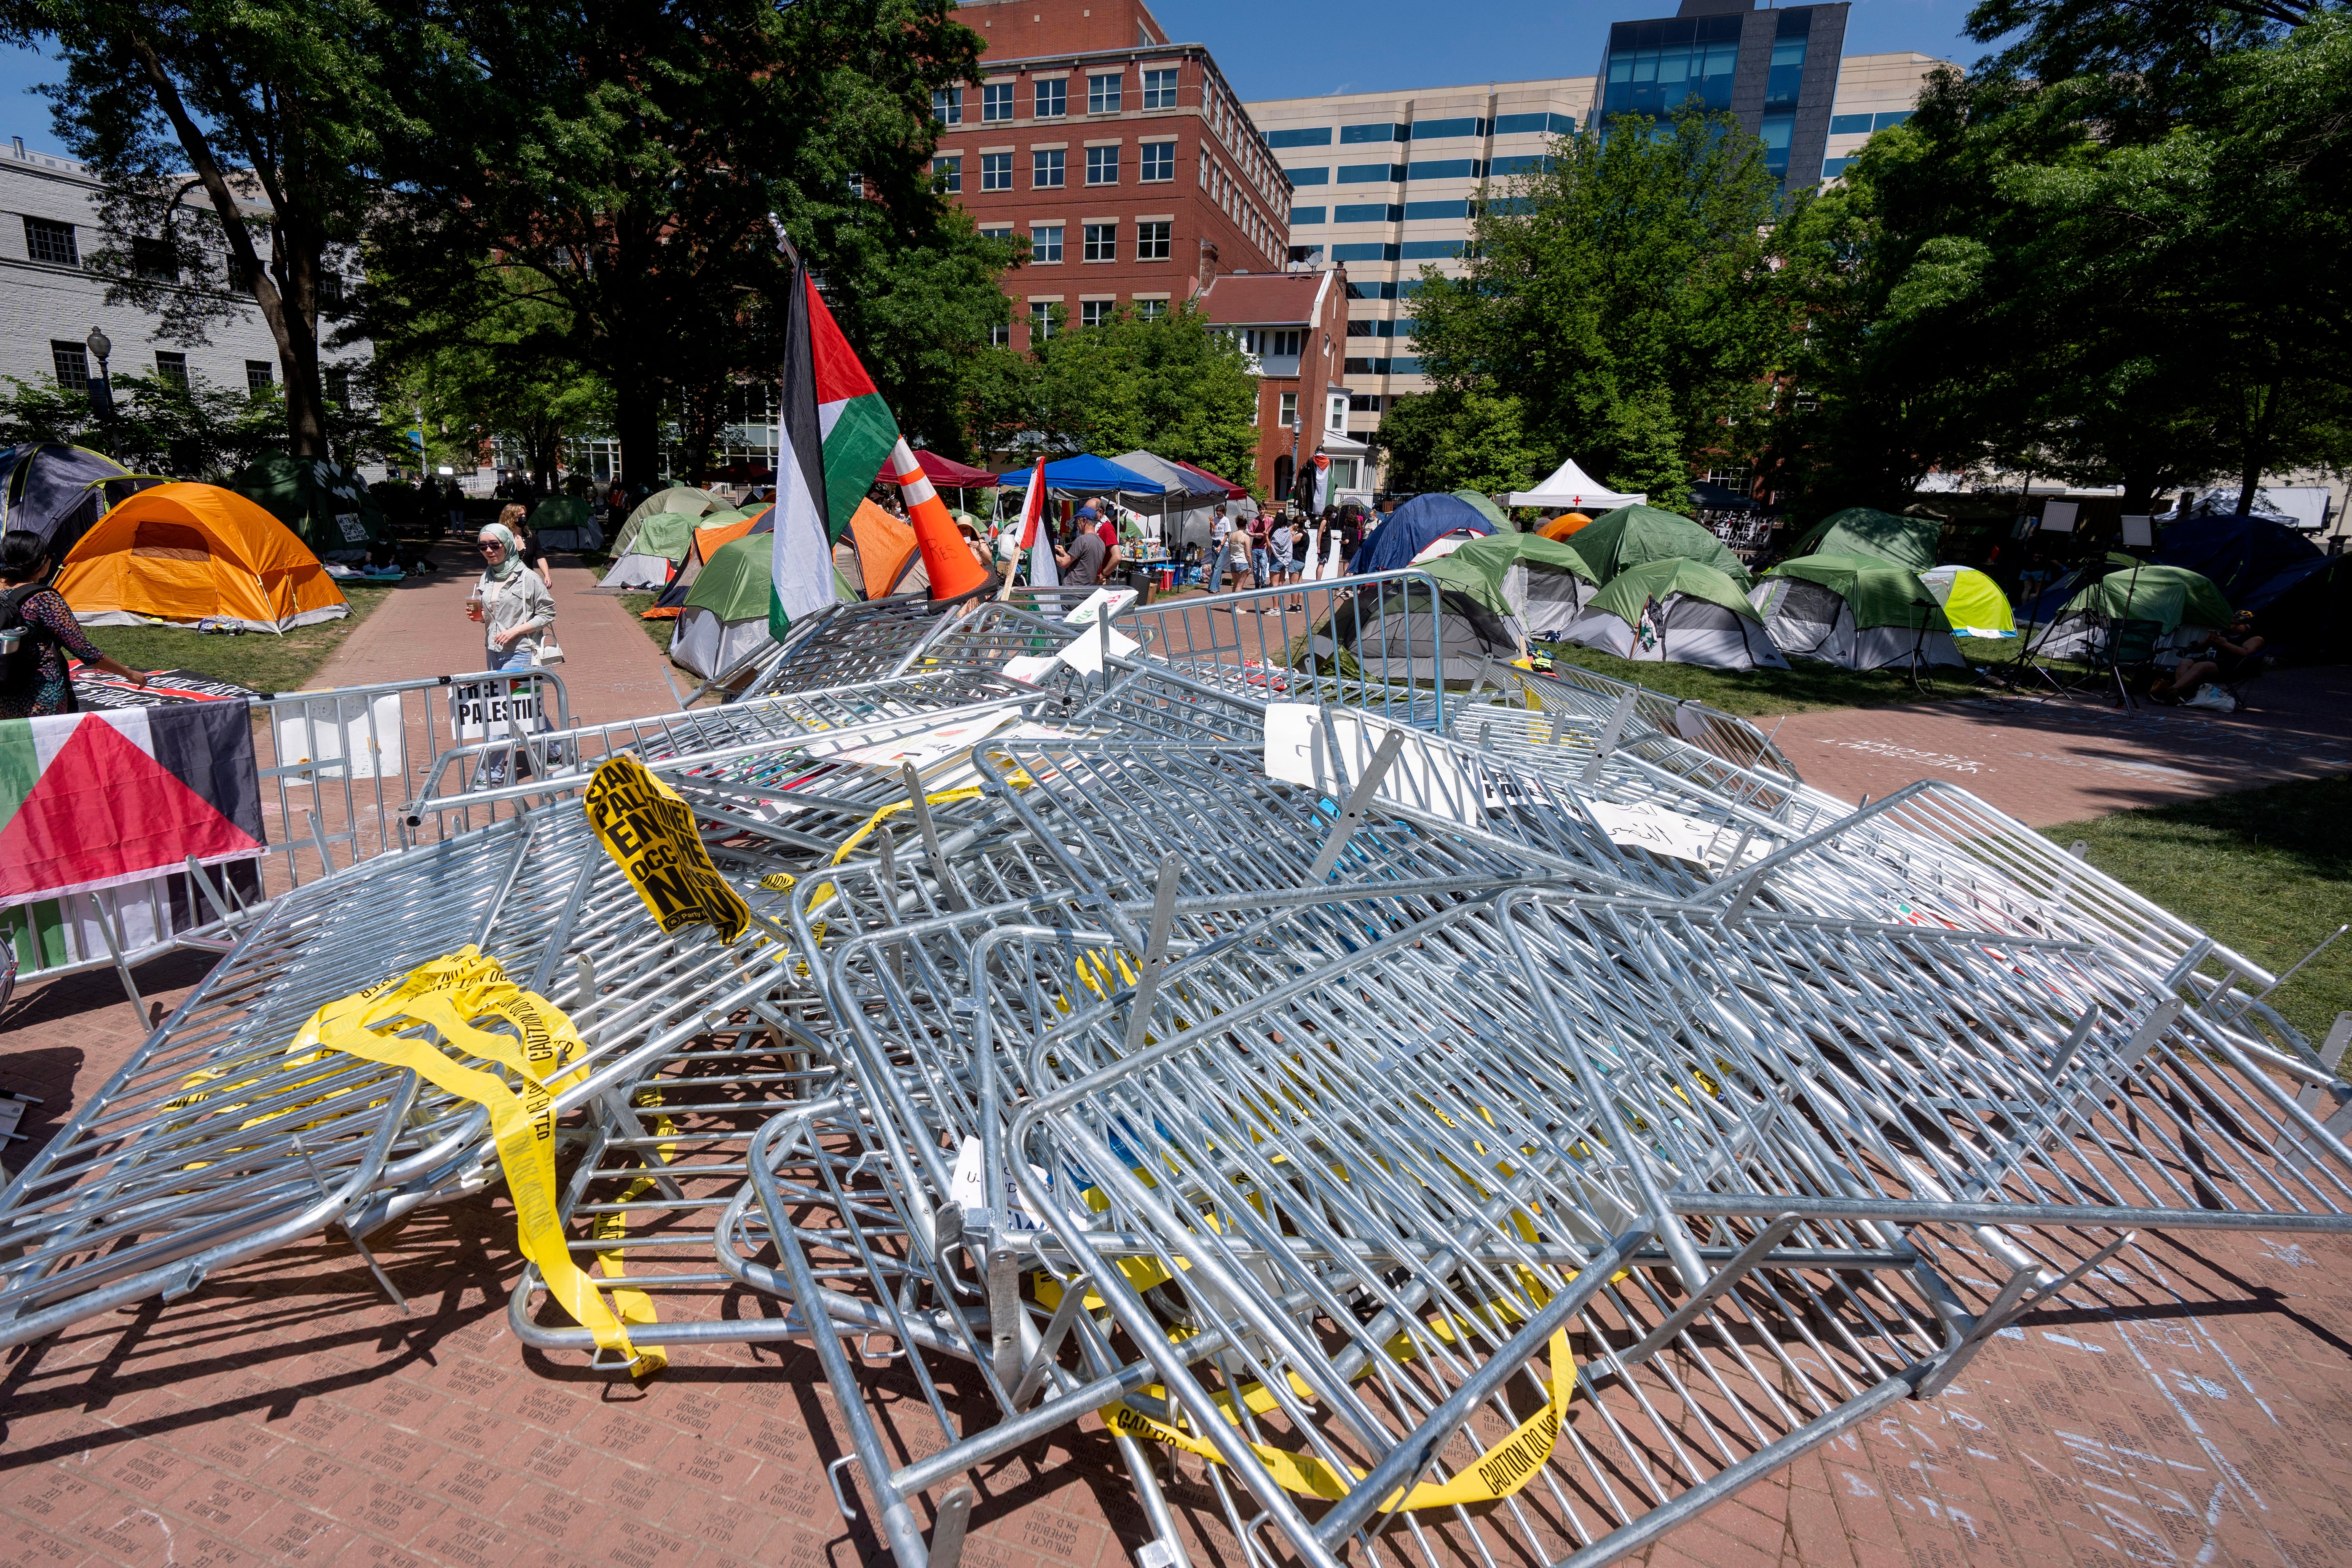 Barricades torn down by demonstrators piled in the centre of an encampment by students protesting against the Israel-Hamas war at George Washington University on 29 April